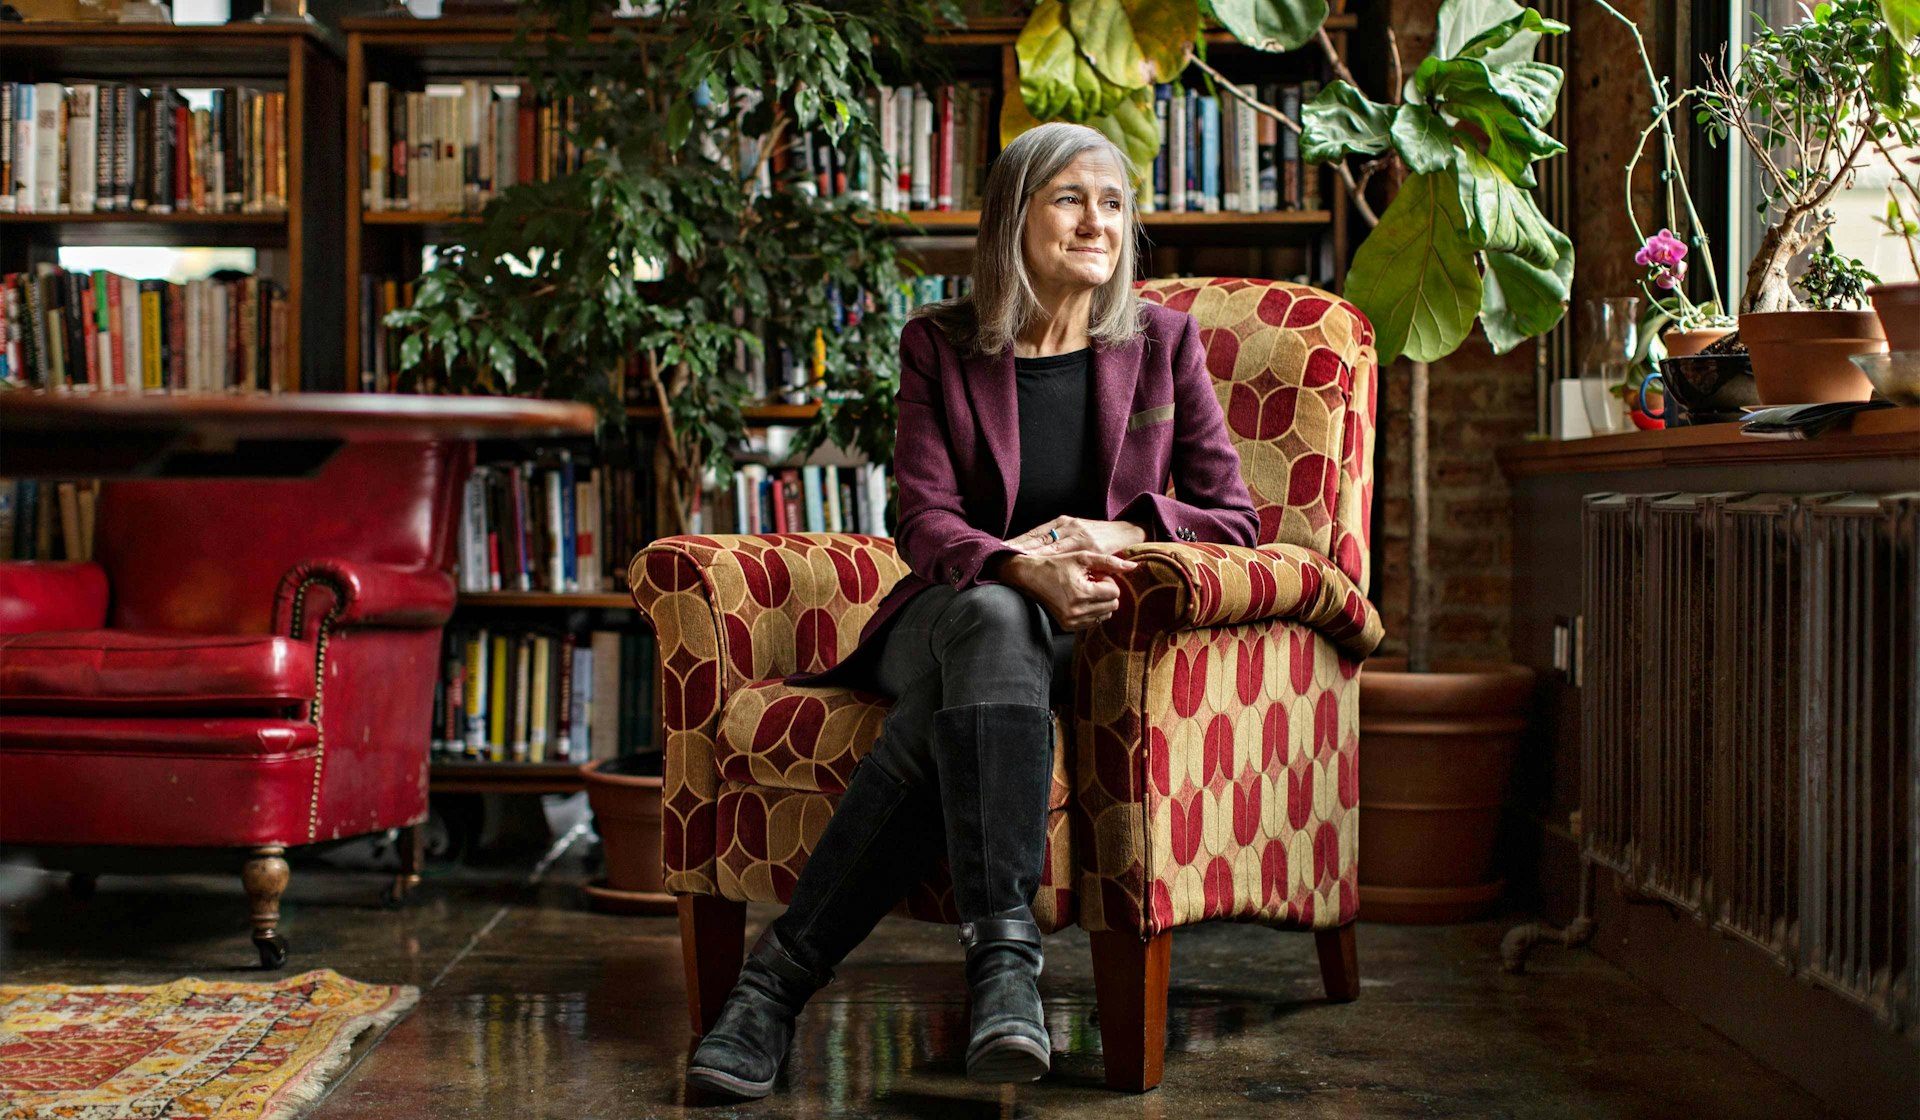 Amy Goodman on giving voice to the ignored and unheard